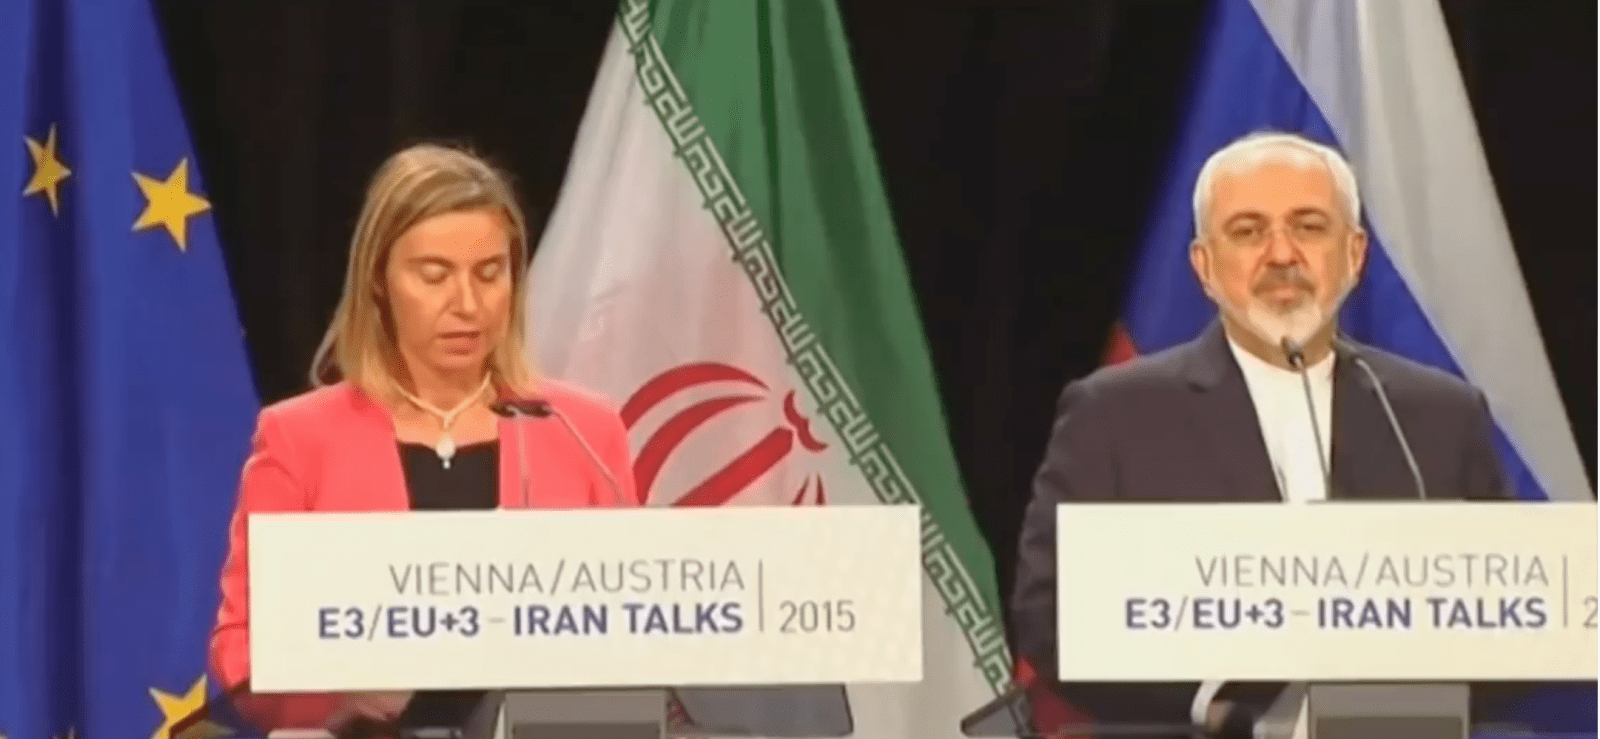 Iran's Nuclear Program: A Chain of Protracted Conflicts and Covert Attacks